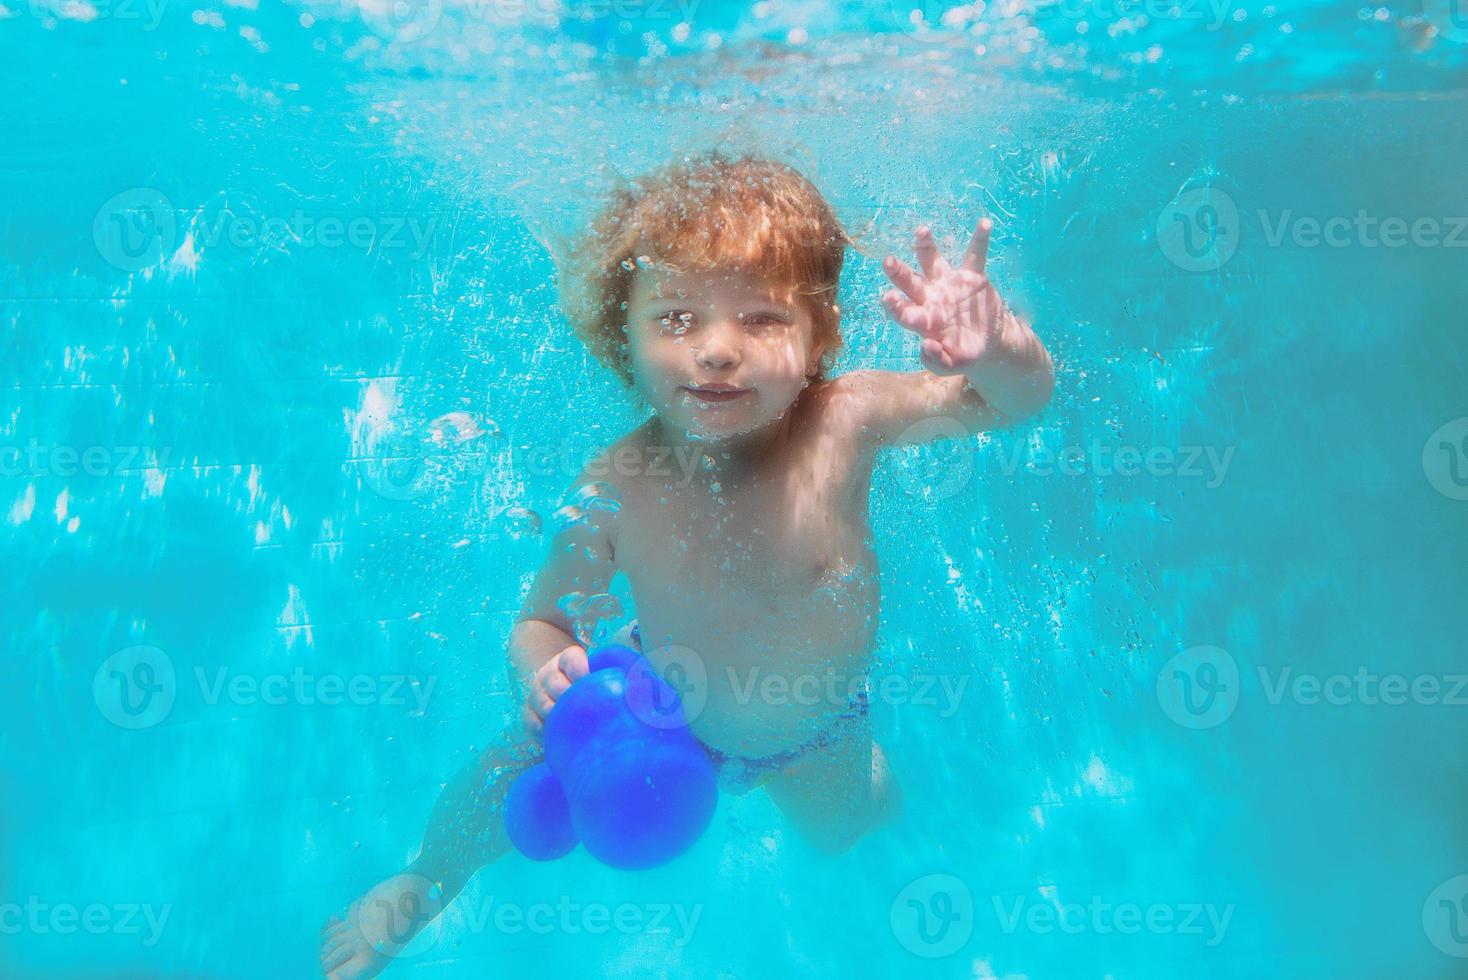 Cute smiling adorable baby girl diving underwater blue pool. Active lifestyle, child swimming lesson. Water sports activity during family summer vacation in tropical resort photo